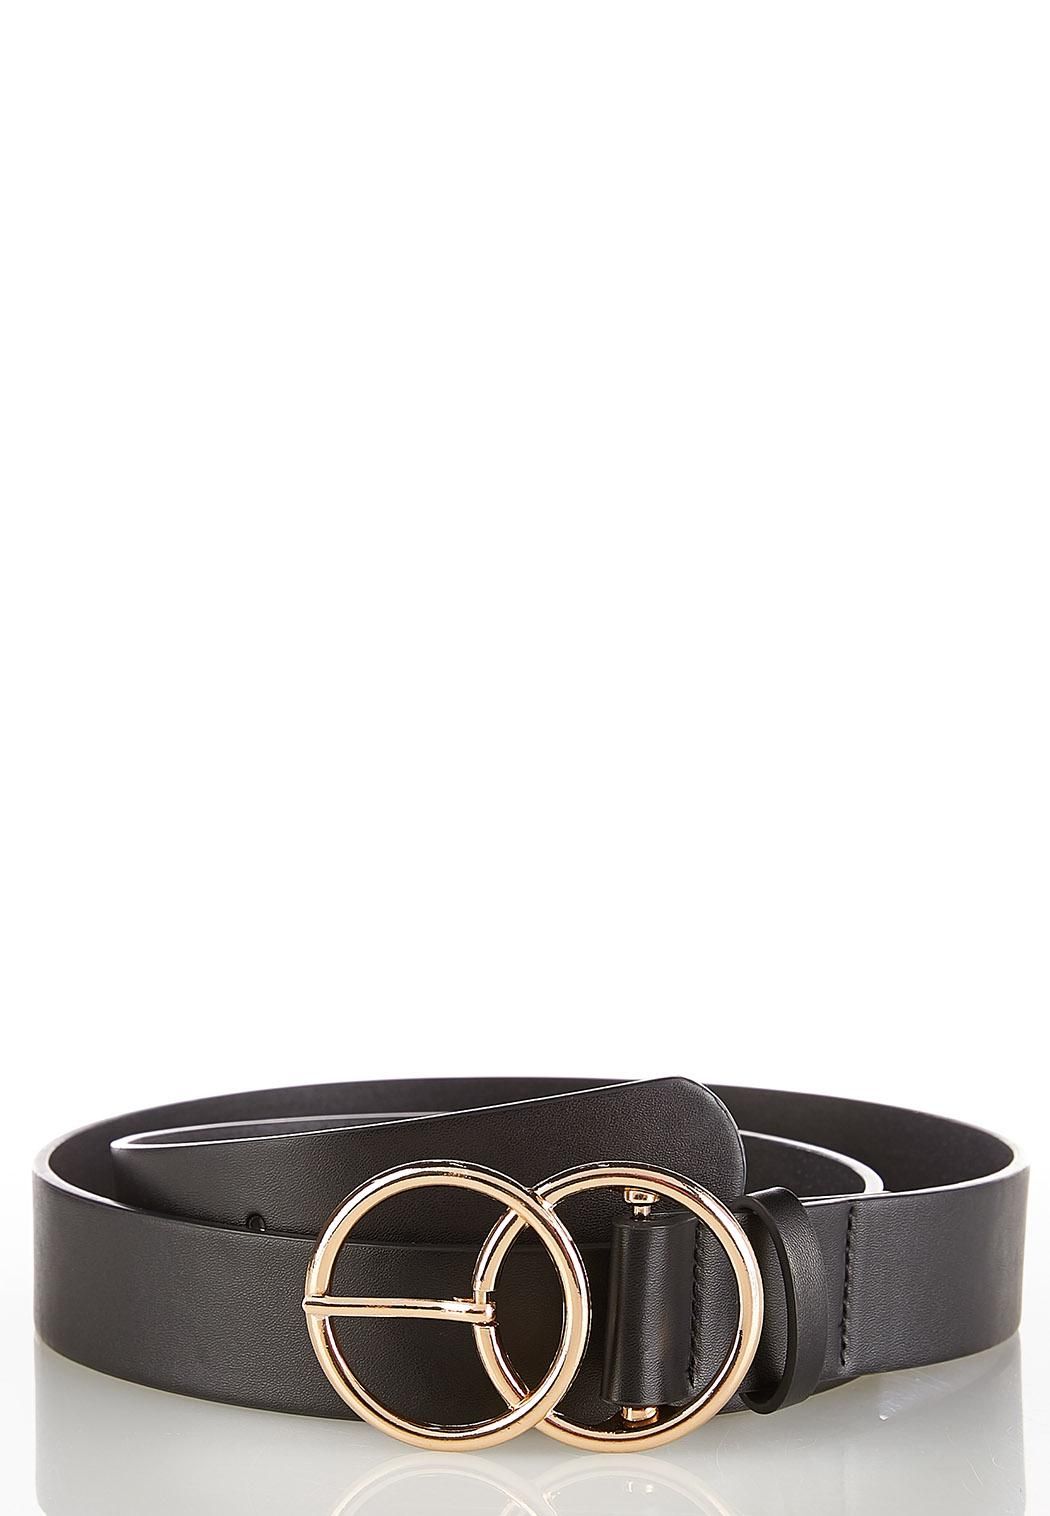 Double Ring Black Belt | Cato Fashions